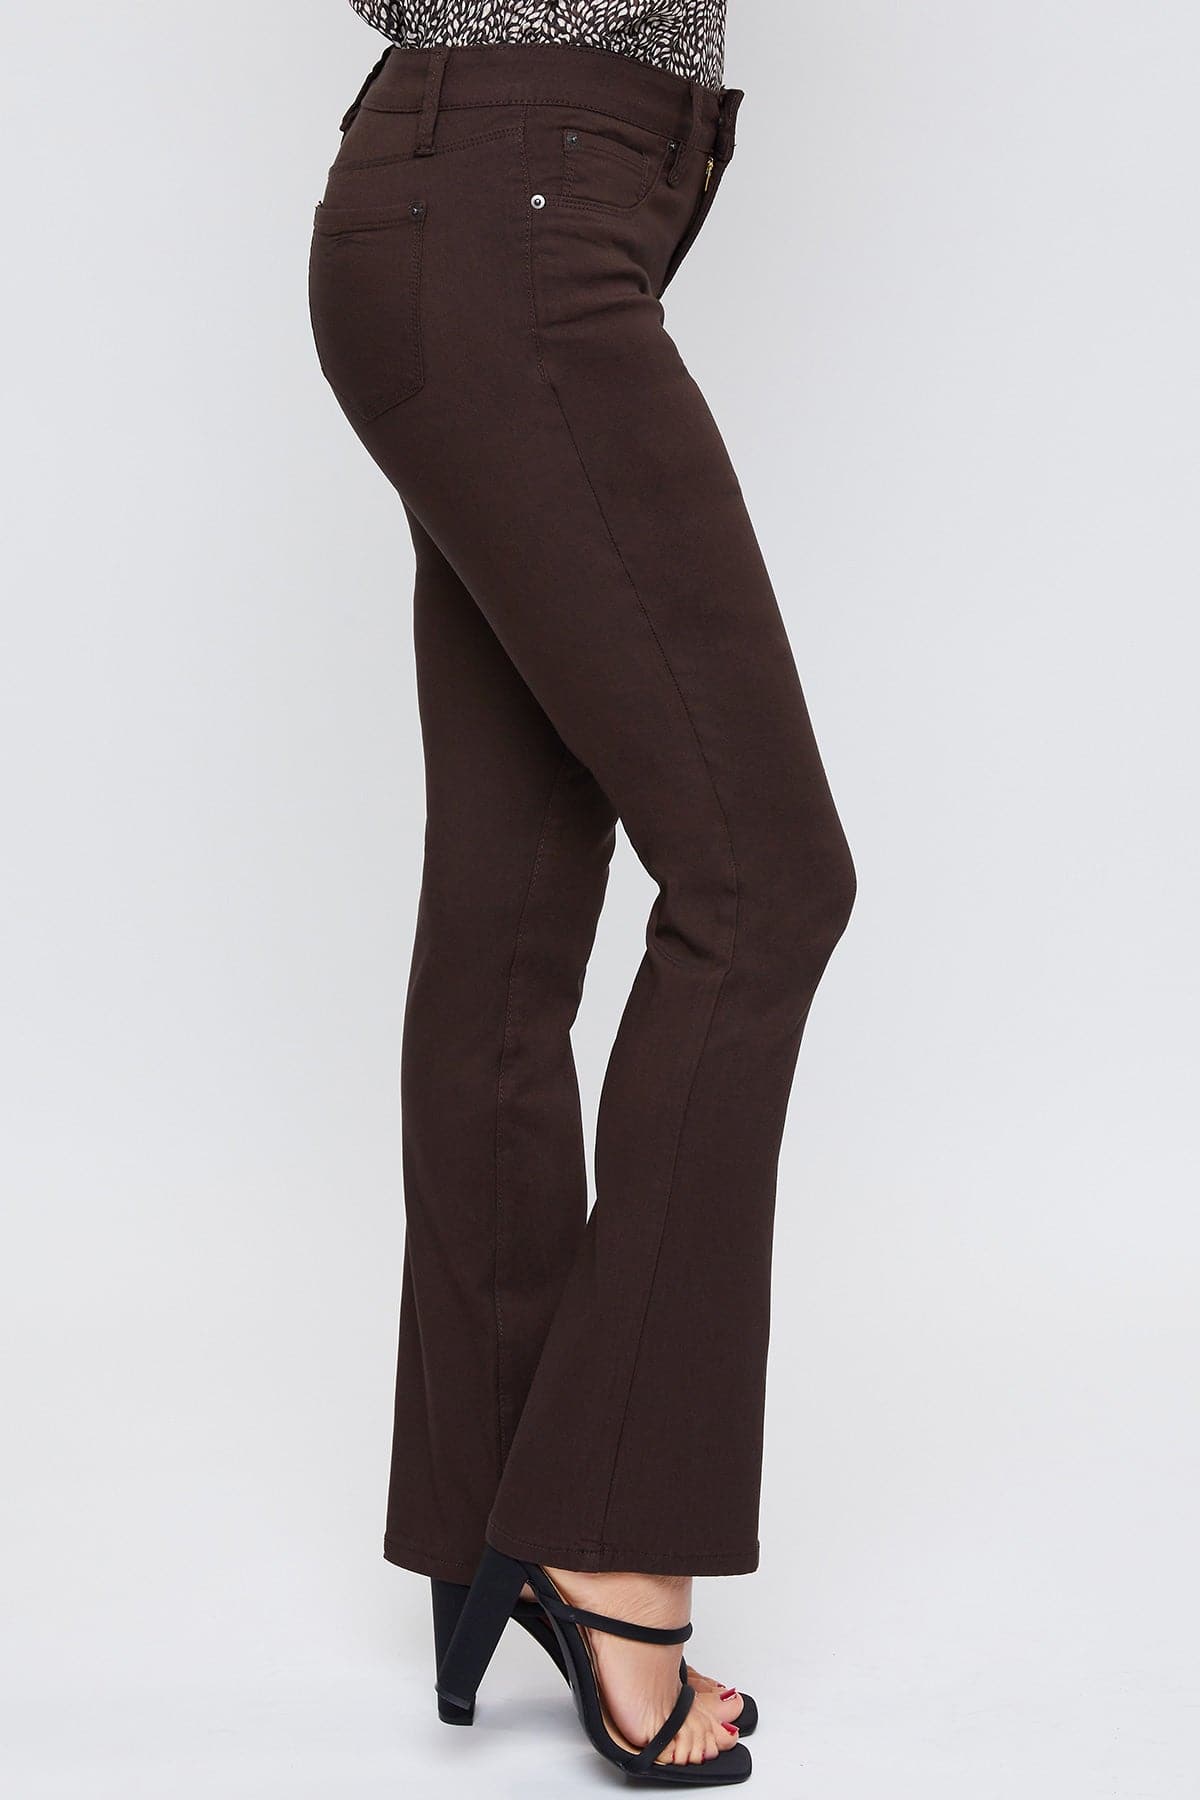 She Is Fearless Mid-Rise Hyper-Stretch Tummy Control Bootcut Pants *Final  Sale*